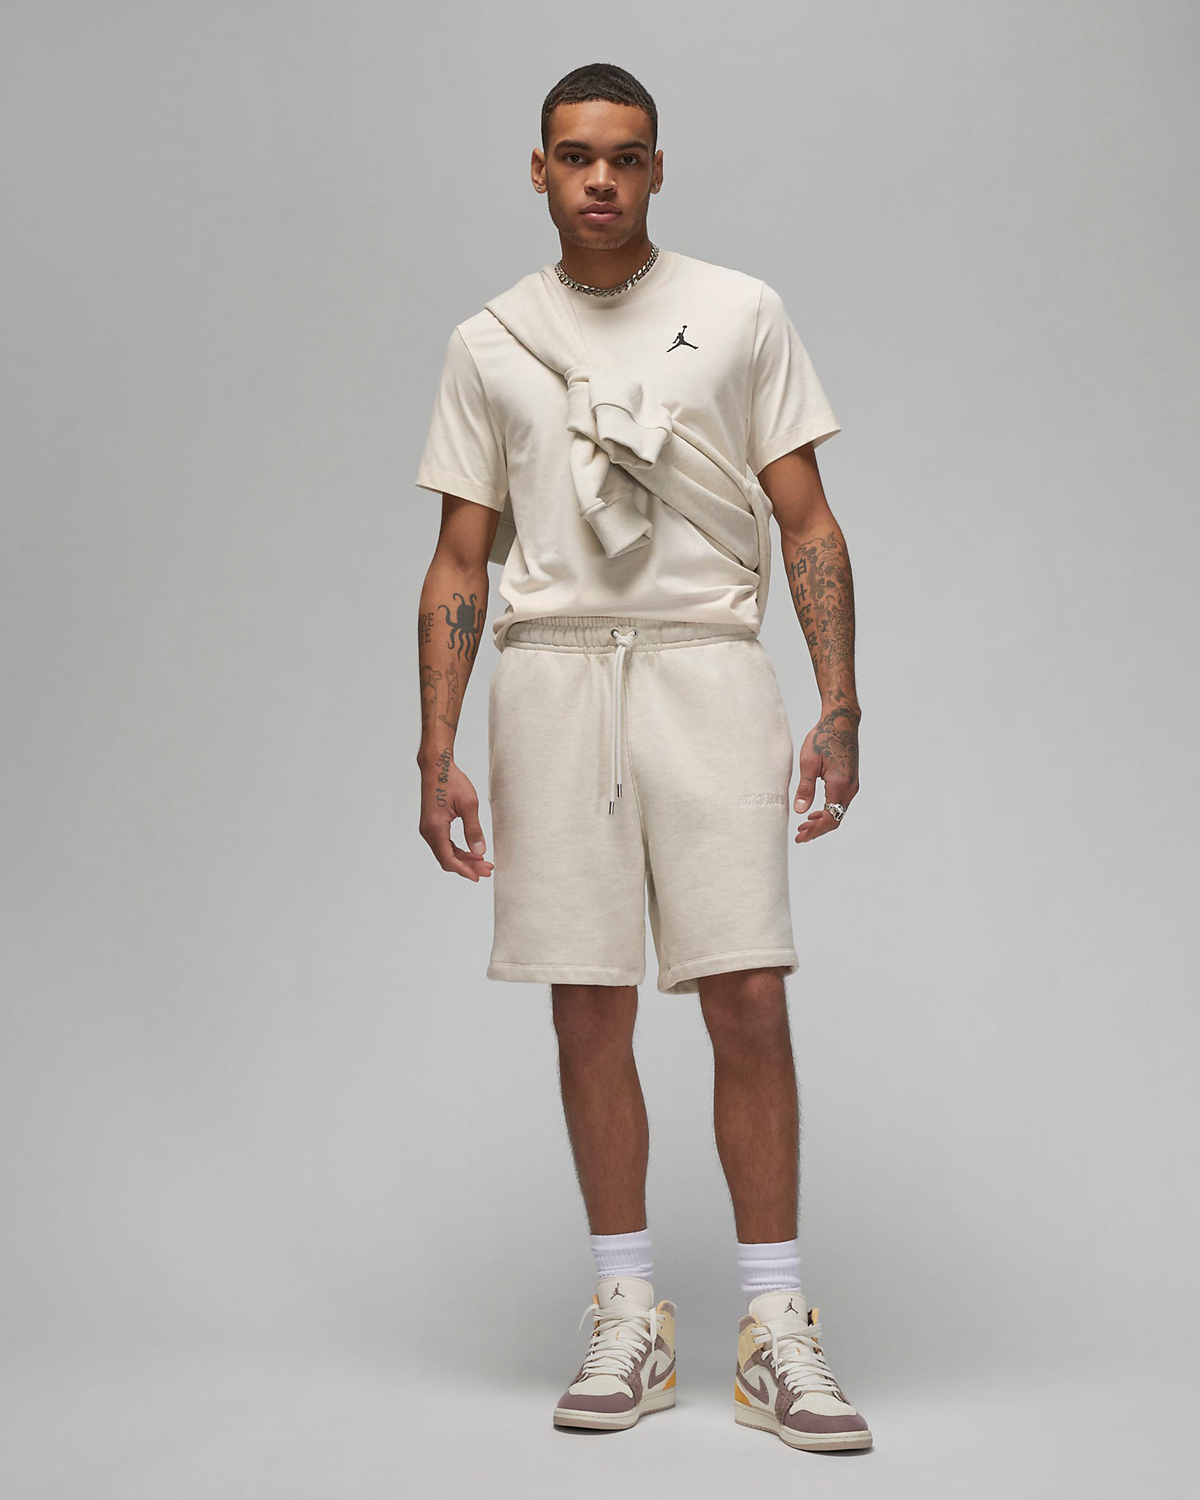 Jordan-Graphic-T-Shirt-Pale-Ivory-Outfit